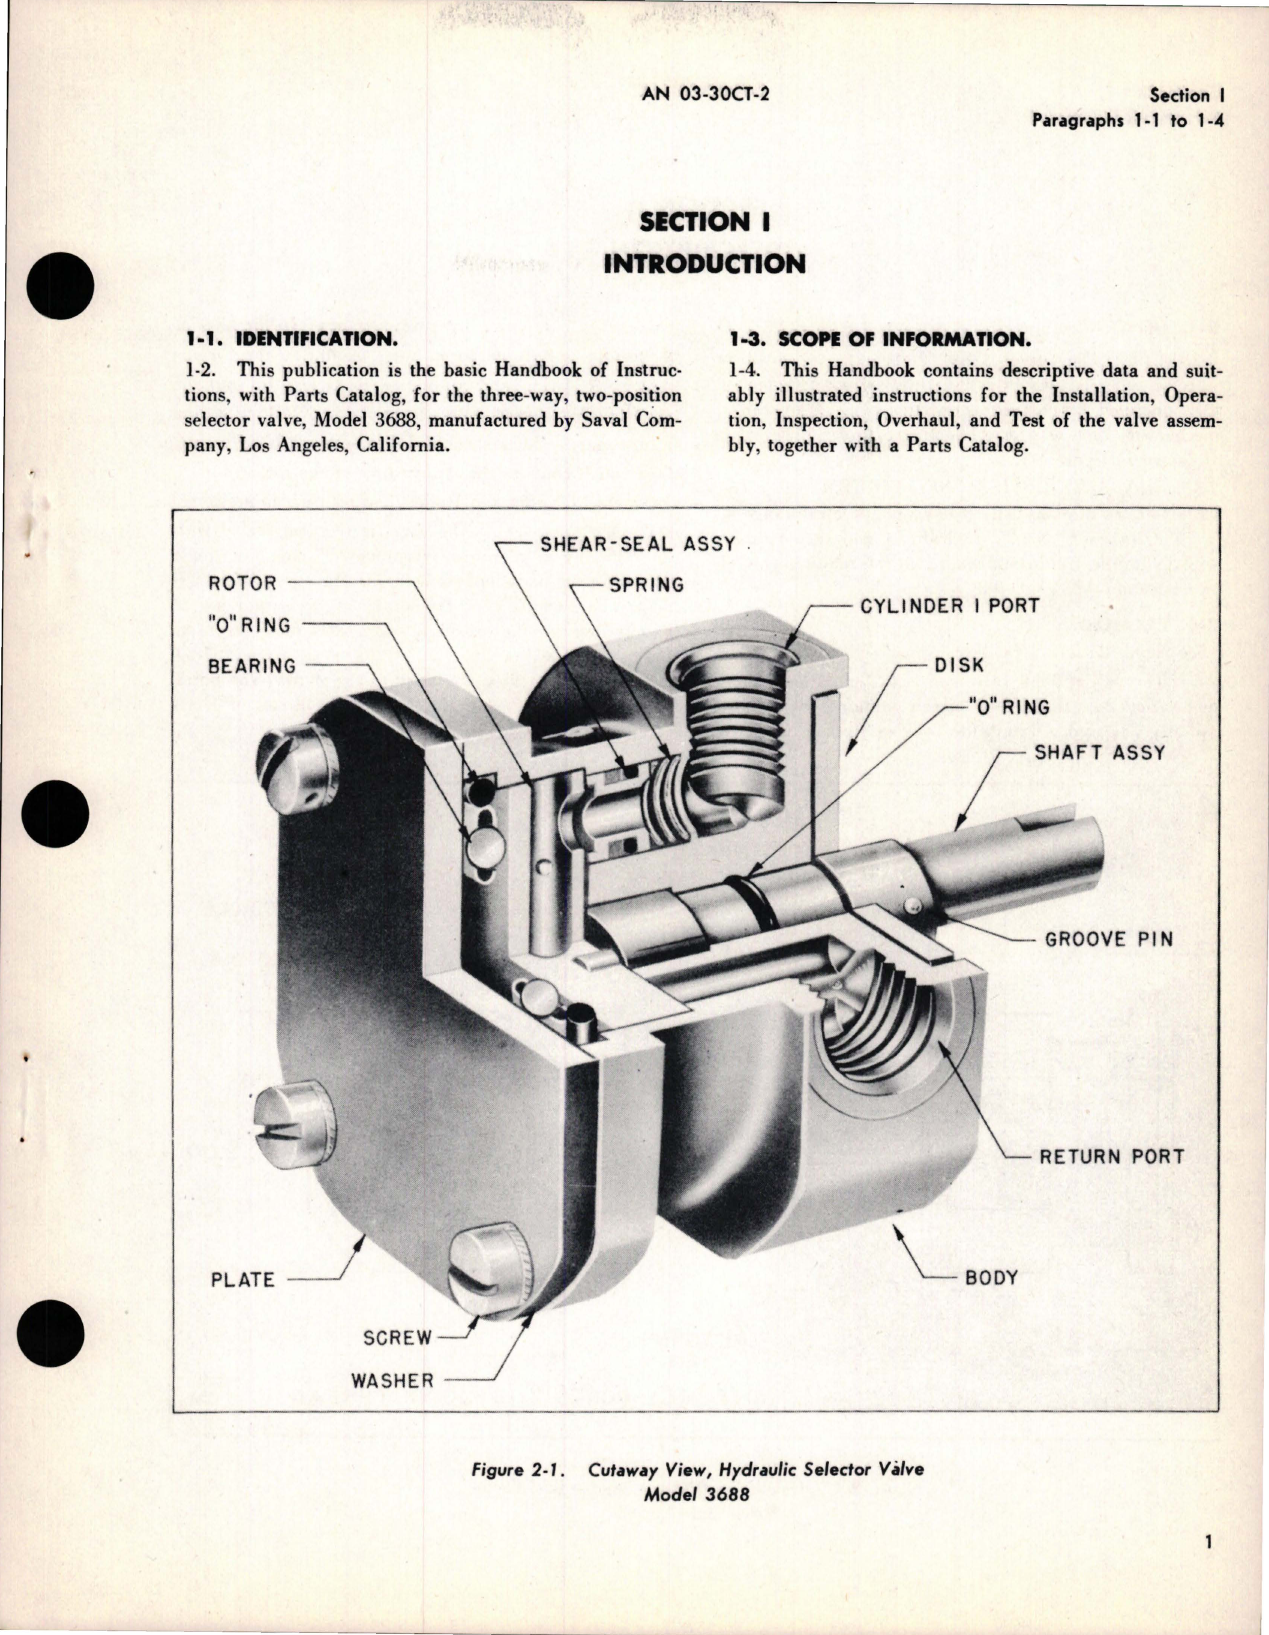 Sample page 5 from AirCorps Library document: Operation, Service, Overhaul with Parts Catalog for Hydraulic Shut-Off Valve - Model 3688